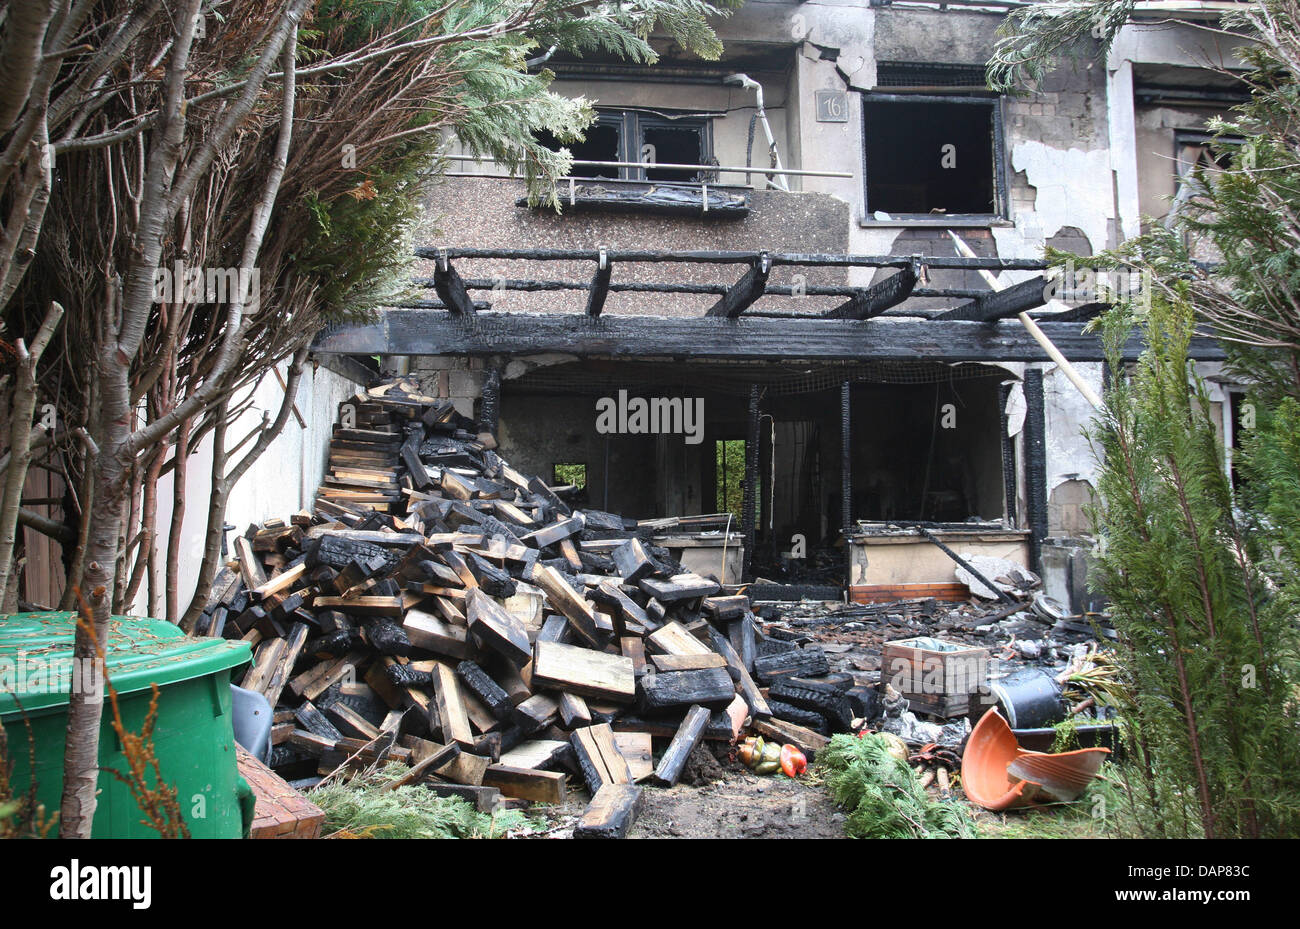 A burnt down row house is pictured in Winterhausen, Germany, 01 August 2011. According to the police, the fire were probably caused by an explosion and broke out during the night. Two dead bodies were found in the house. Photo: KARL-JOSEF HILDENBRAND Stock Photo